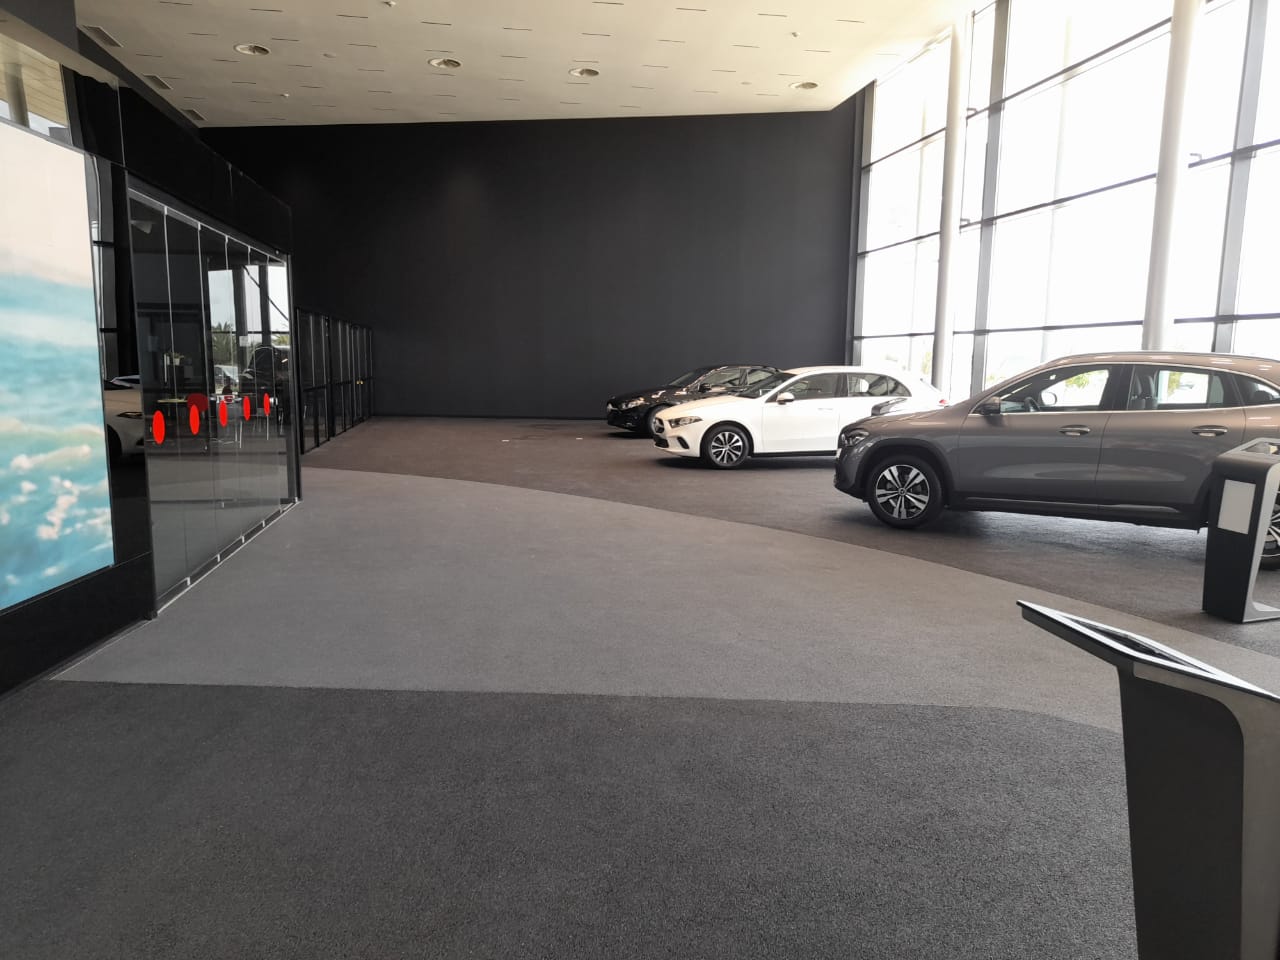 MERCEDES SHOWROOMWhatsApp Image 2021-05-27 at 14.56.13 (2)